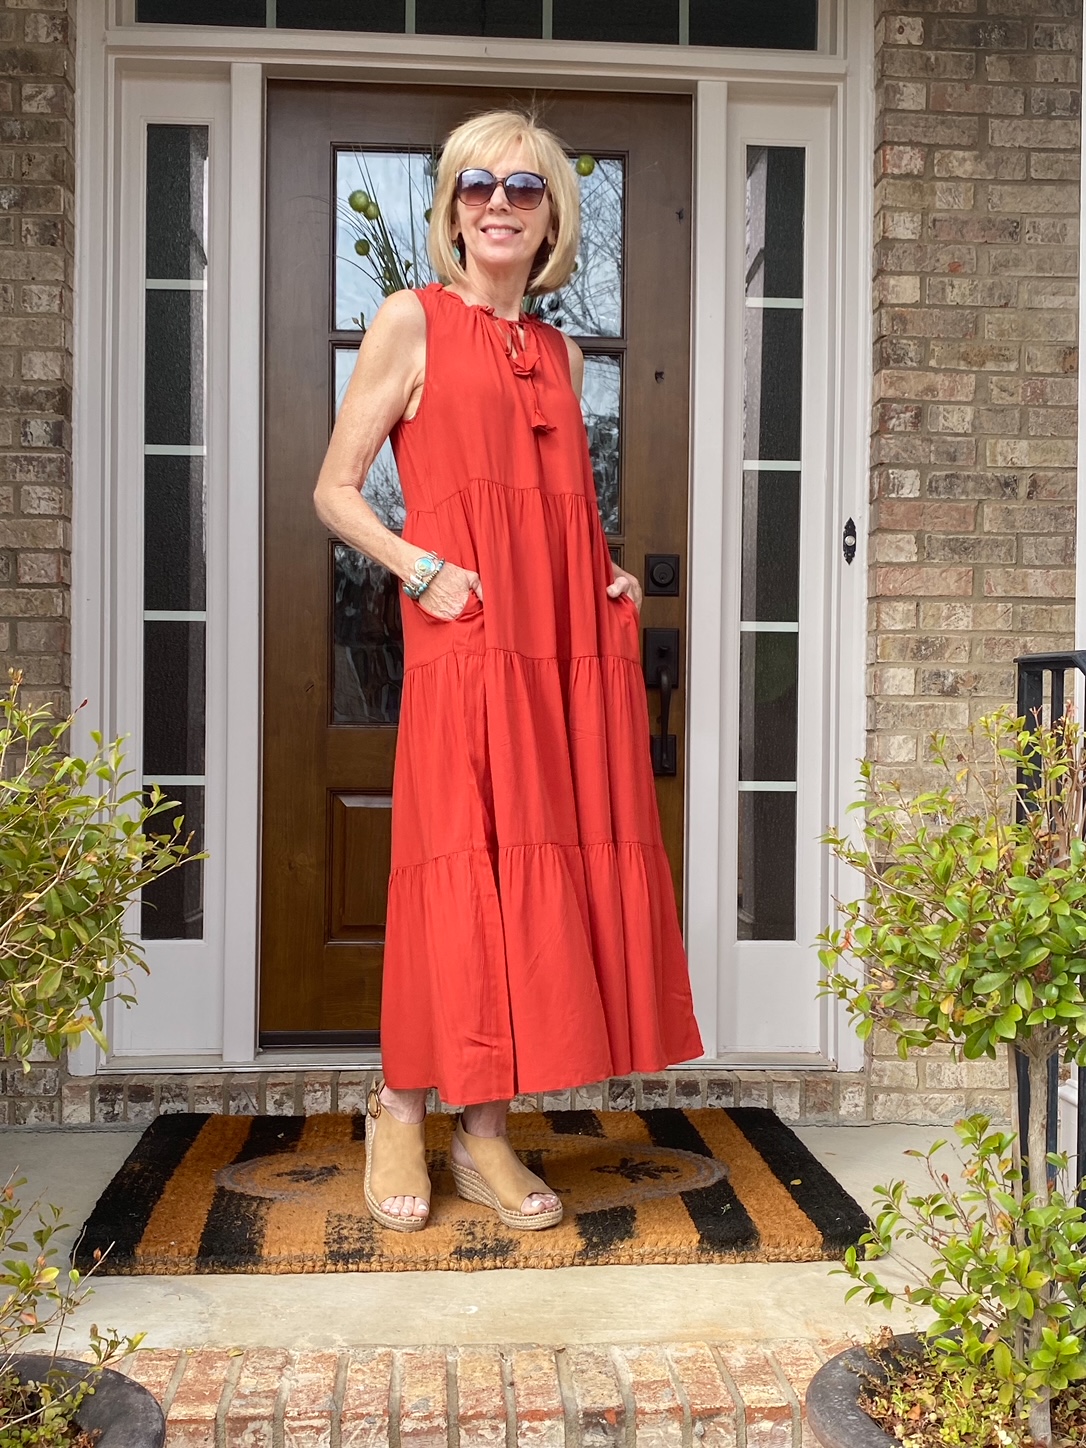 Summer Fashion For Women Over 50